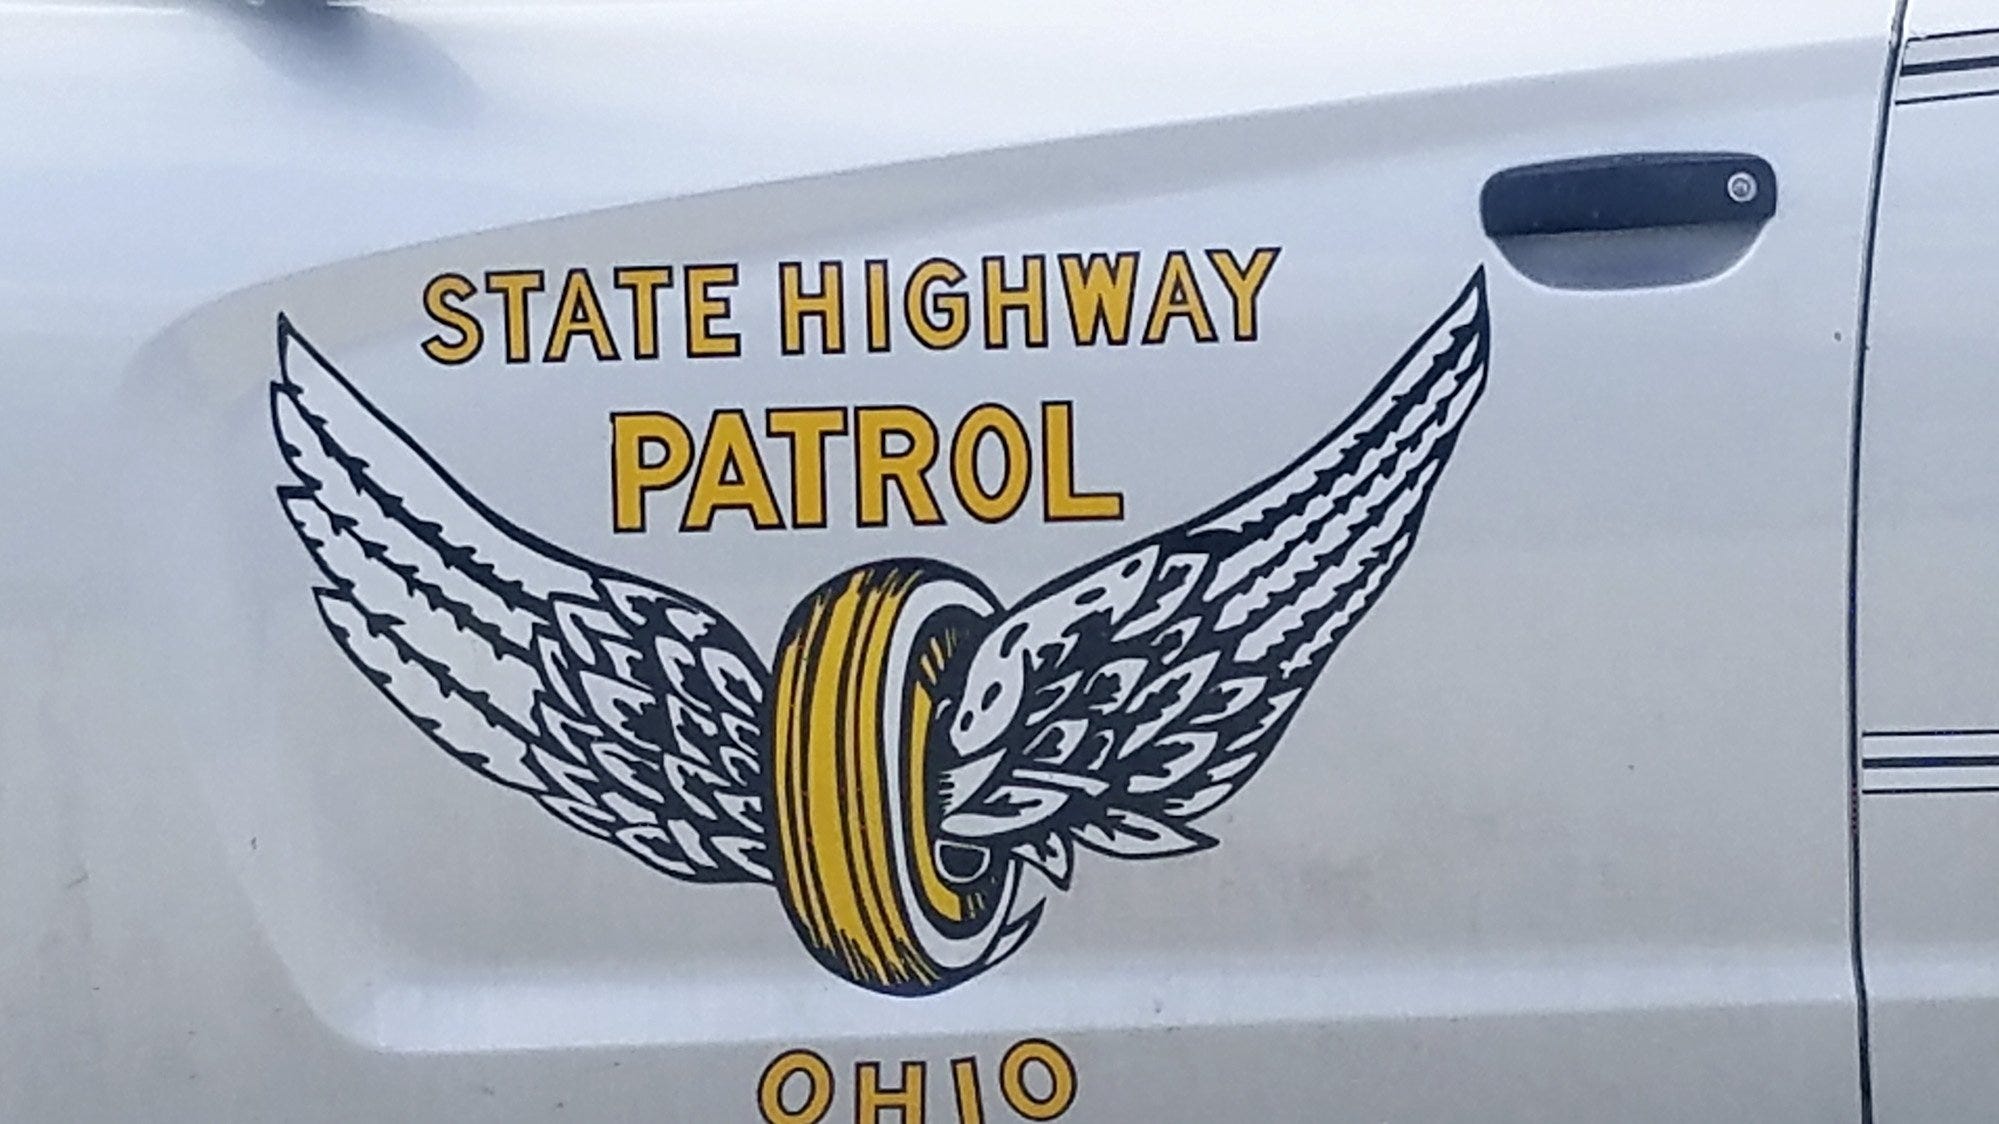 OSHP Vehicle crash deaths over Memorial Day weekend declined sharply